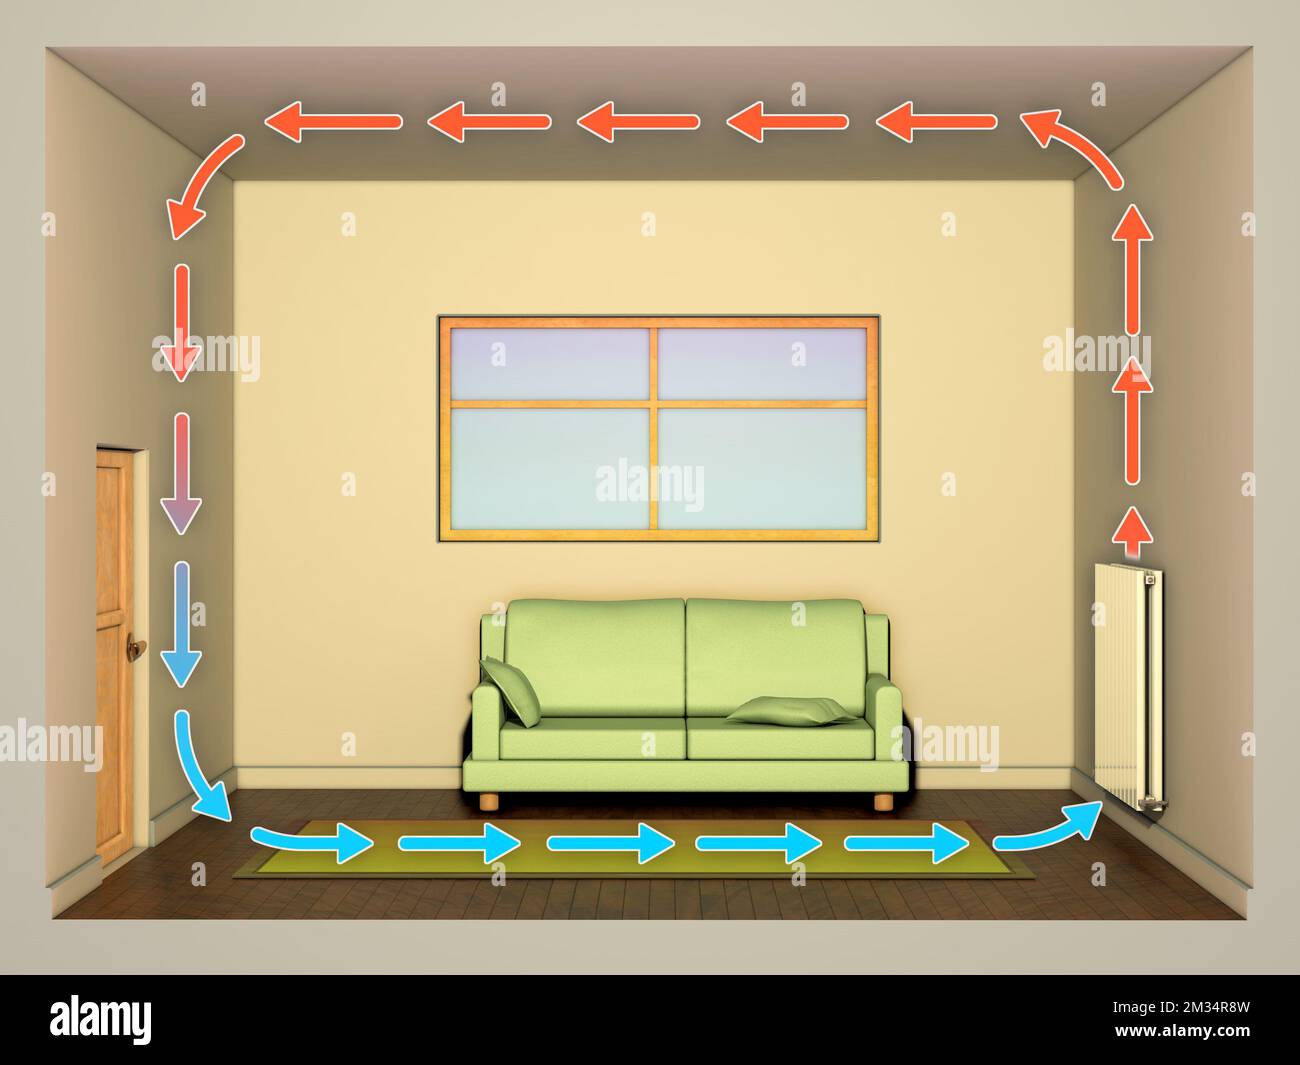 Convection heating in a residential building. Digital illustration, 3d rendering. Stock Photo